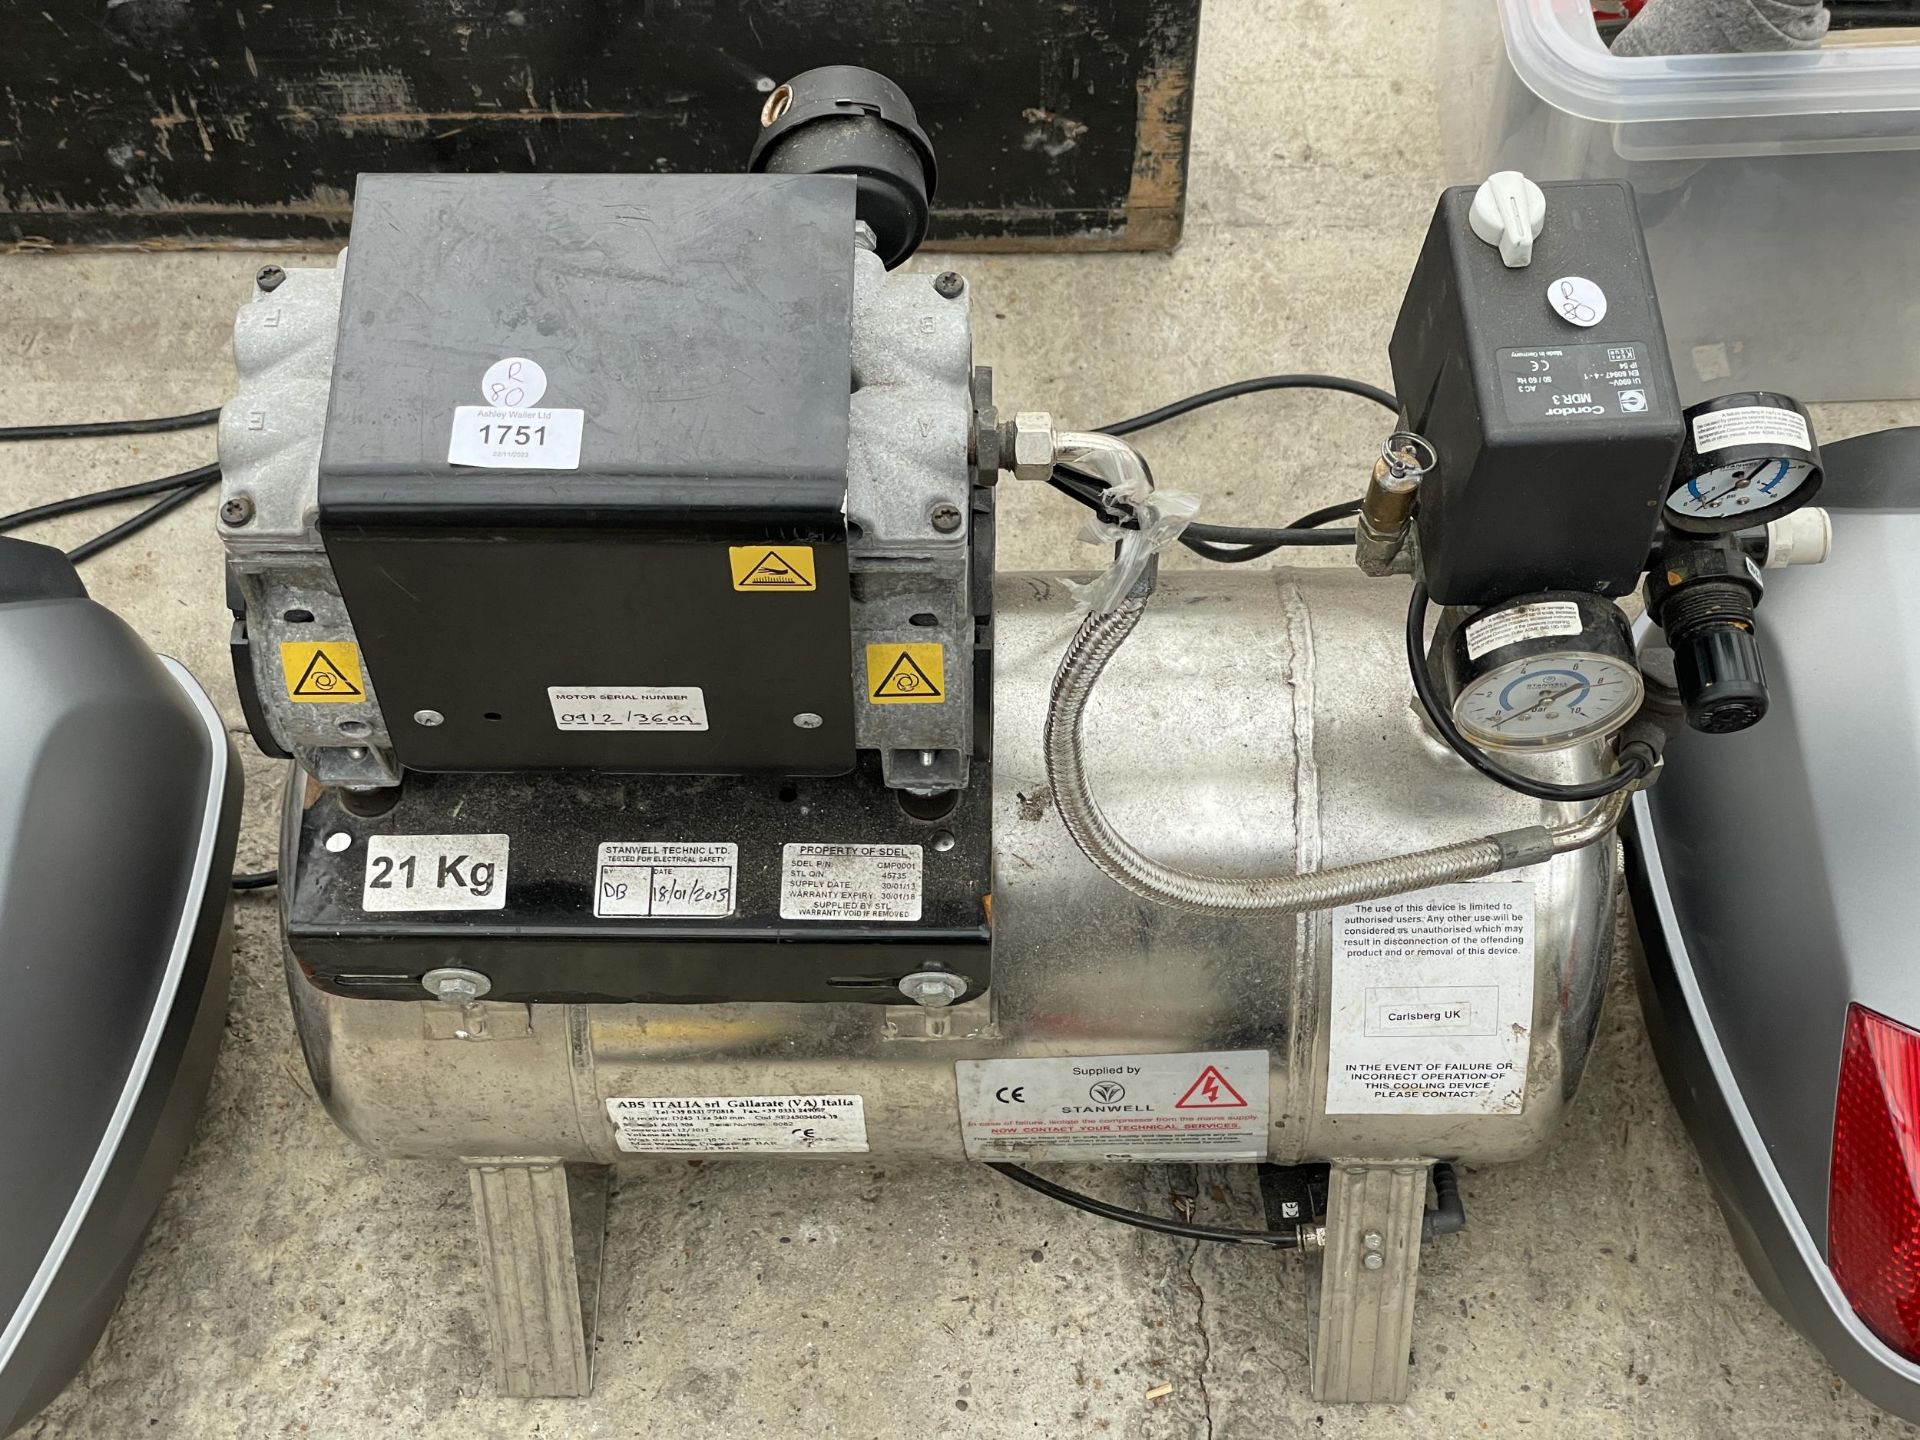 A 21KG STAINLESS STEEL AIR COMPRESSOR